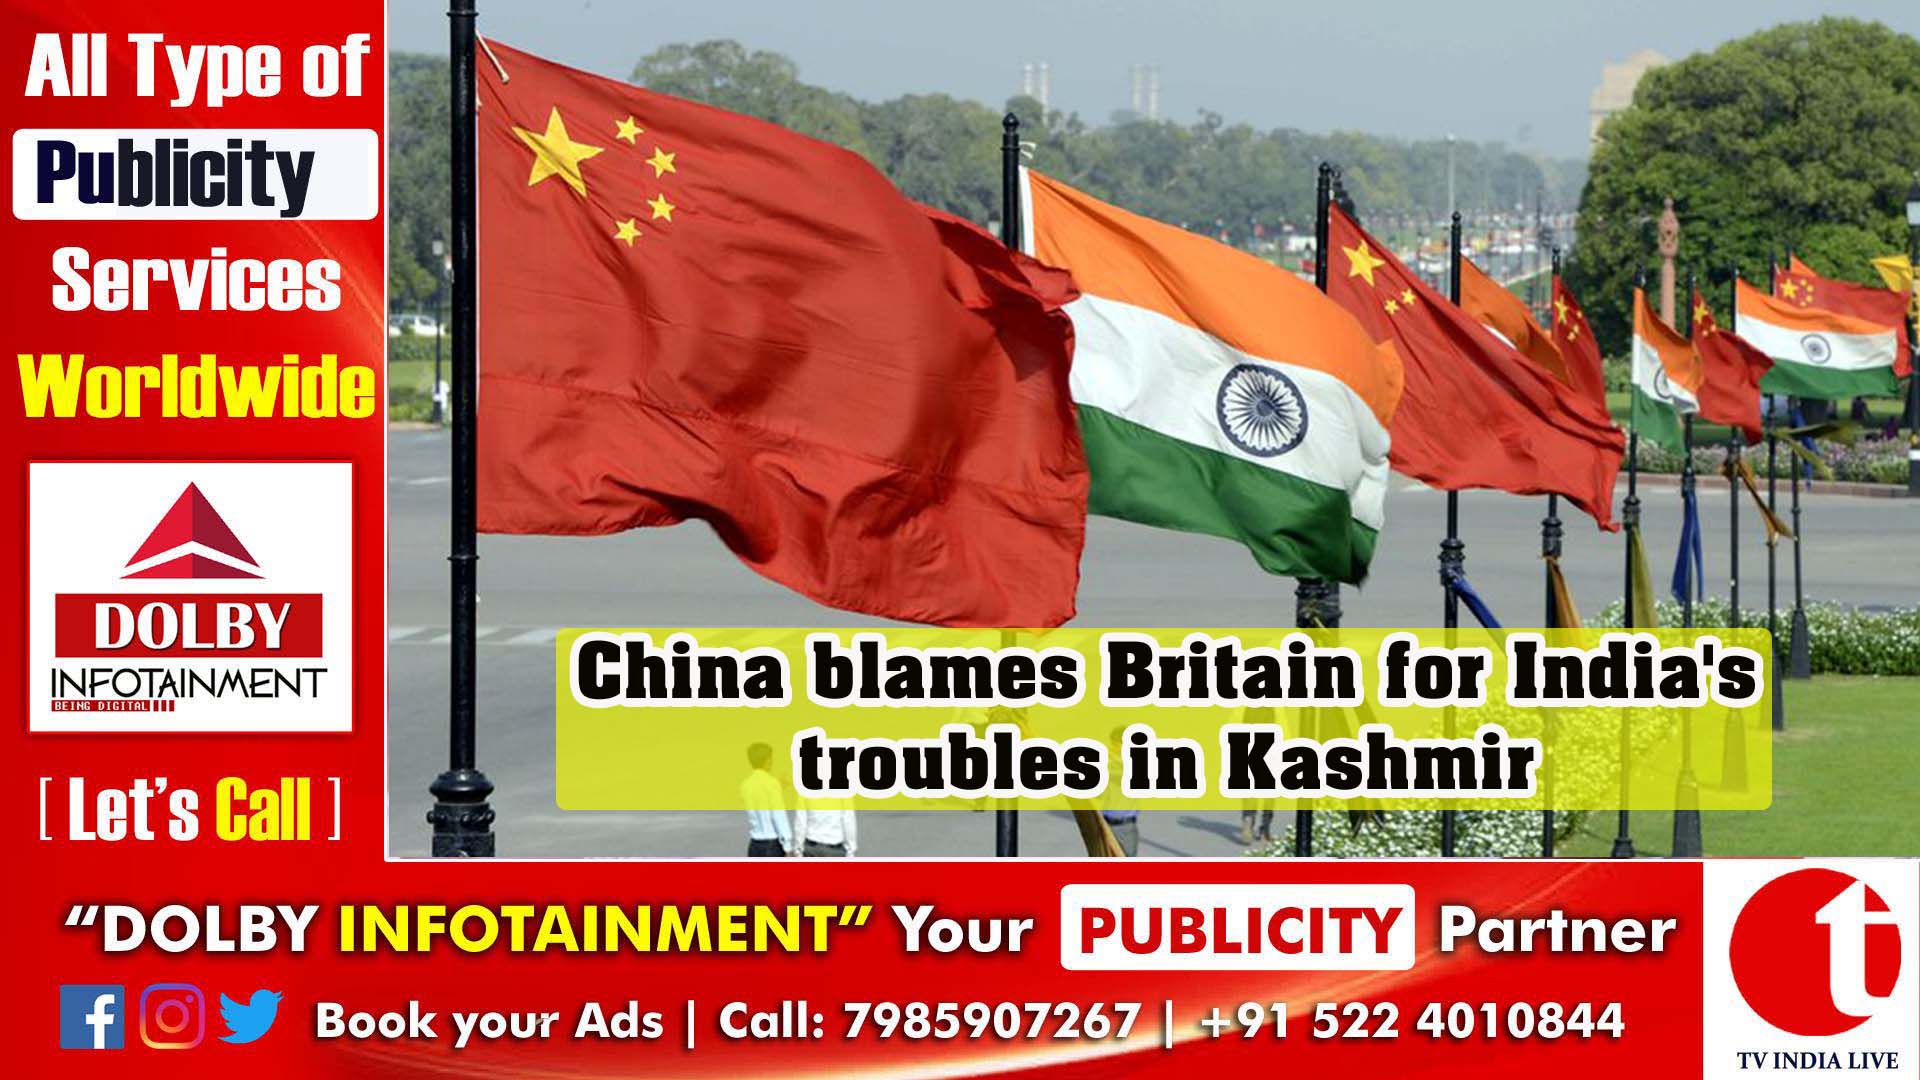 China blames Britain for India's troubles in Kashmir